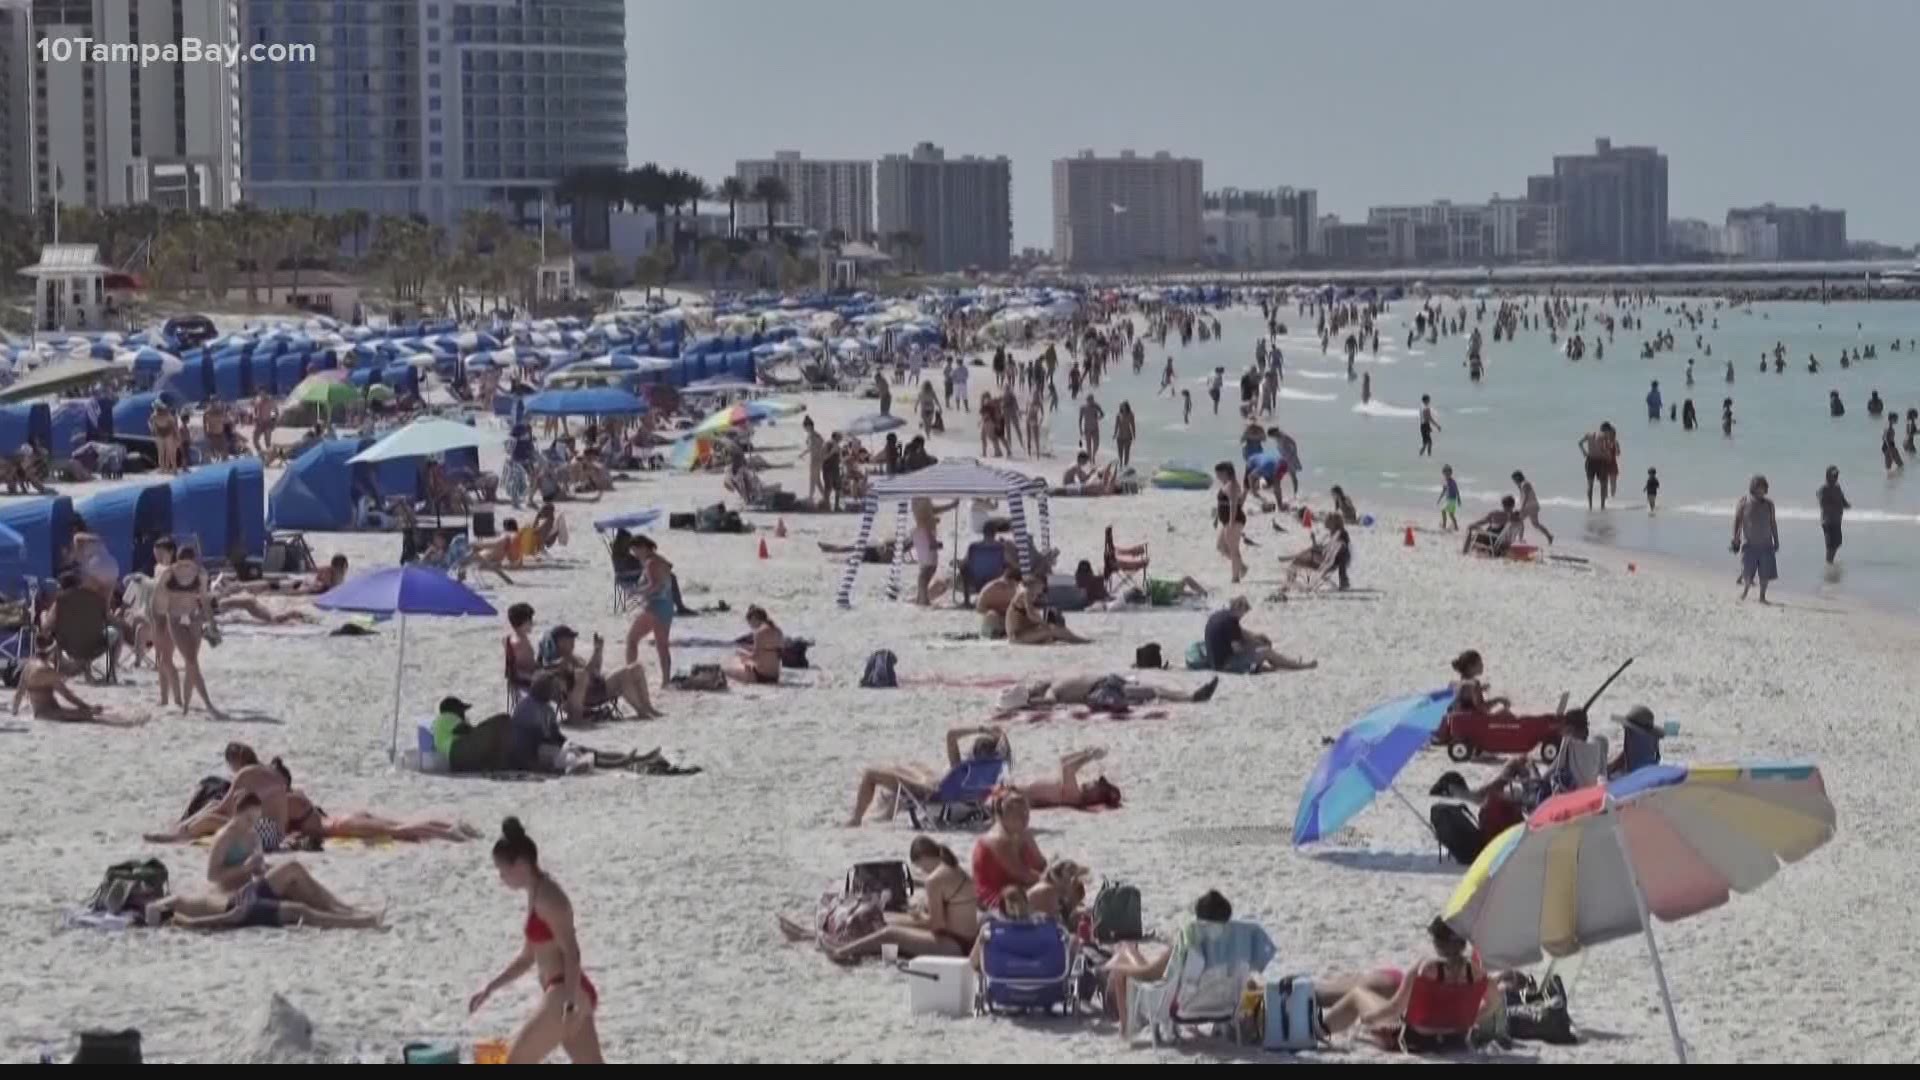 Spring break has gotten out of hand in some spots, leading to a curfew in areas like Miami Beach.